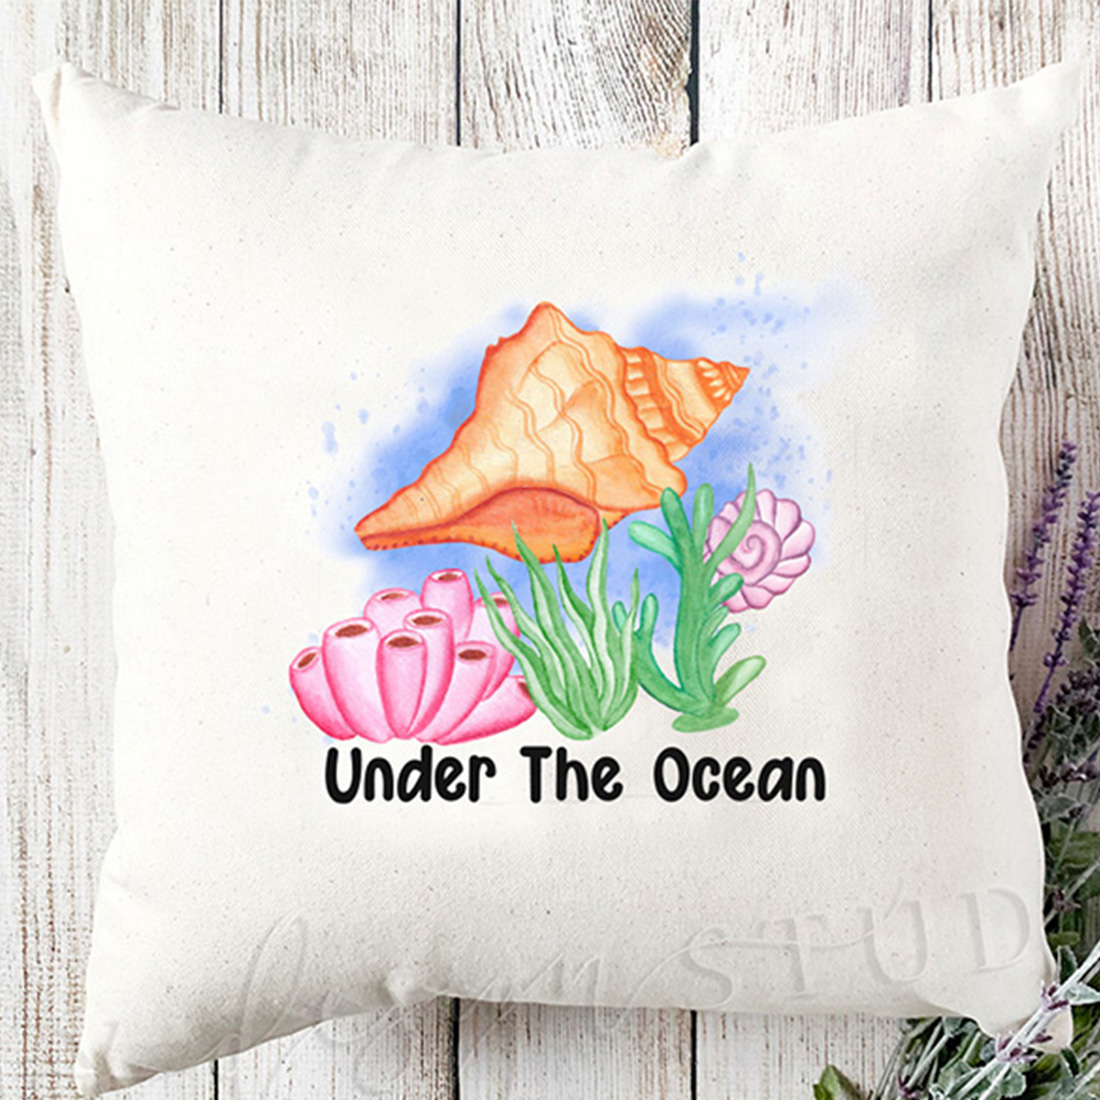 Under the ocean illustration on a pillow.